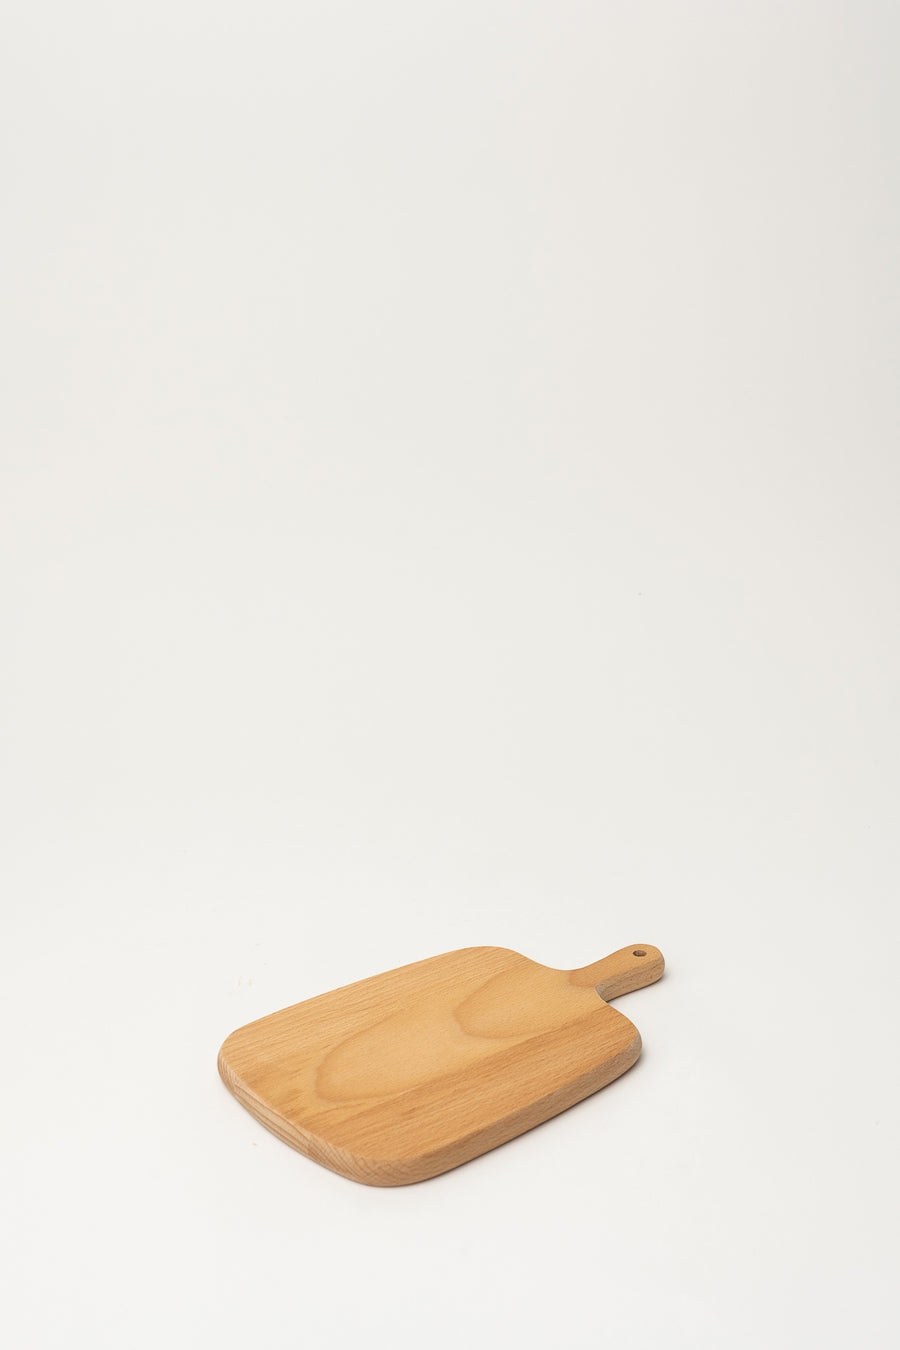 Wooden Serving Platter - Square Small